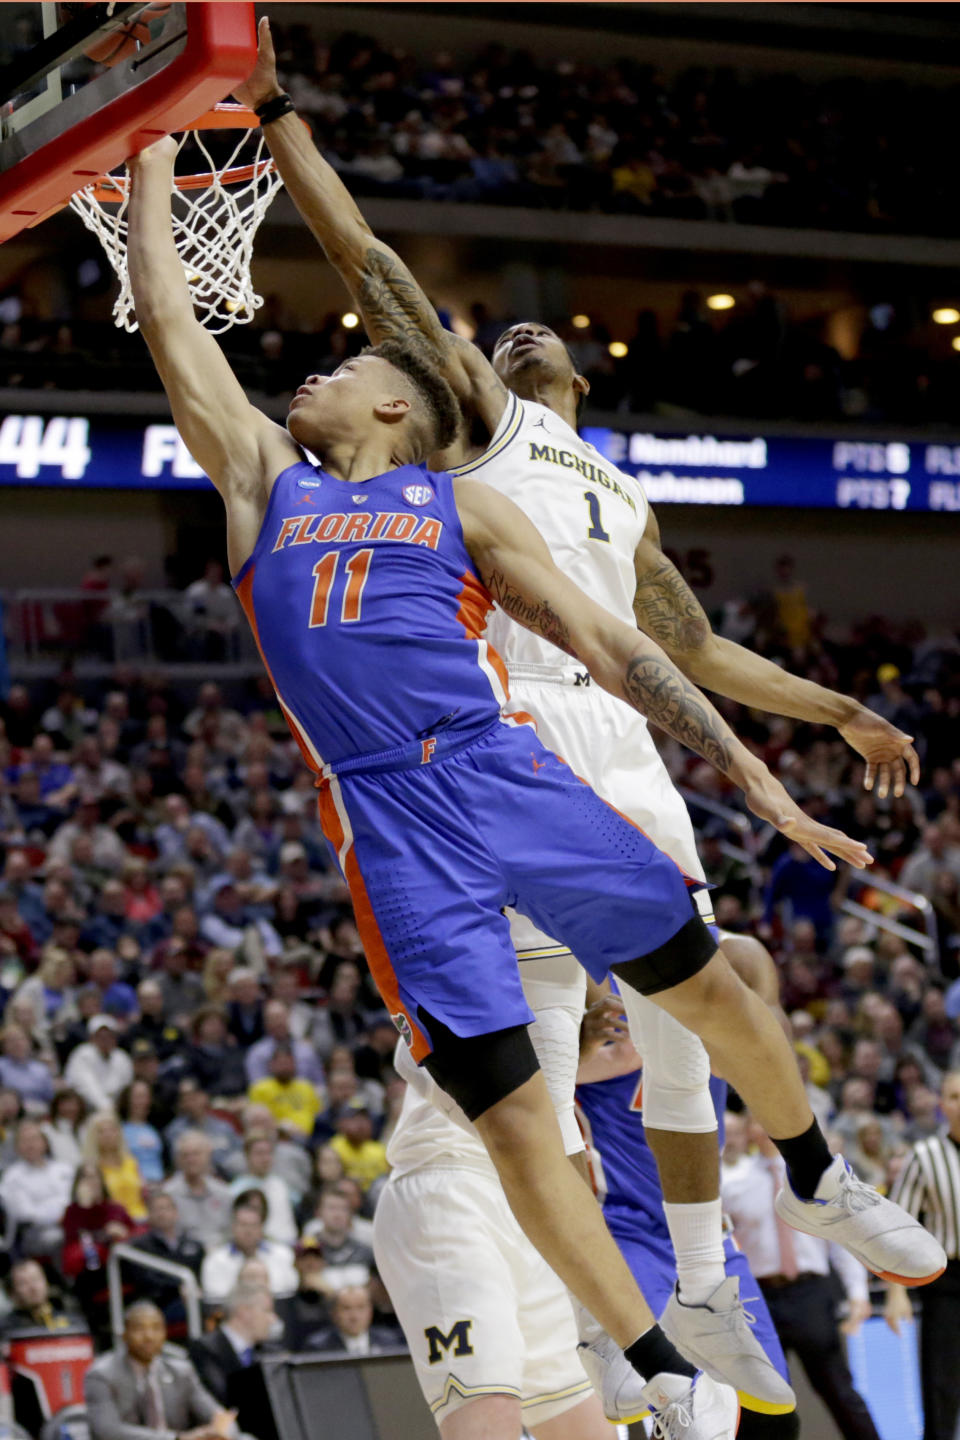 Michigan's Charles Matthews (1) blocks a layup by Florida's Keyontae Johnson (11) during the second half of a second round men's college basketball game in the NCAA Tournament, in Des Moines, Iowa, Saturday, March 23, 2019. (AP Photo/Nati Harnik)